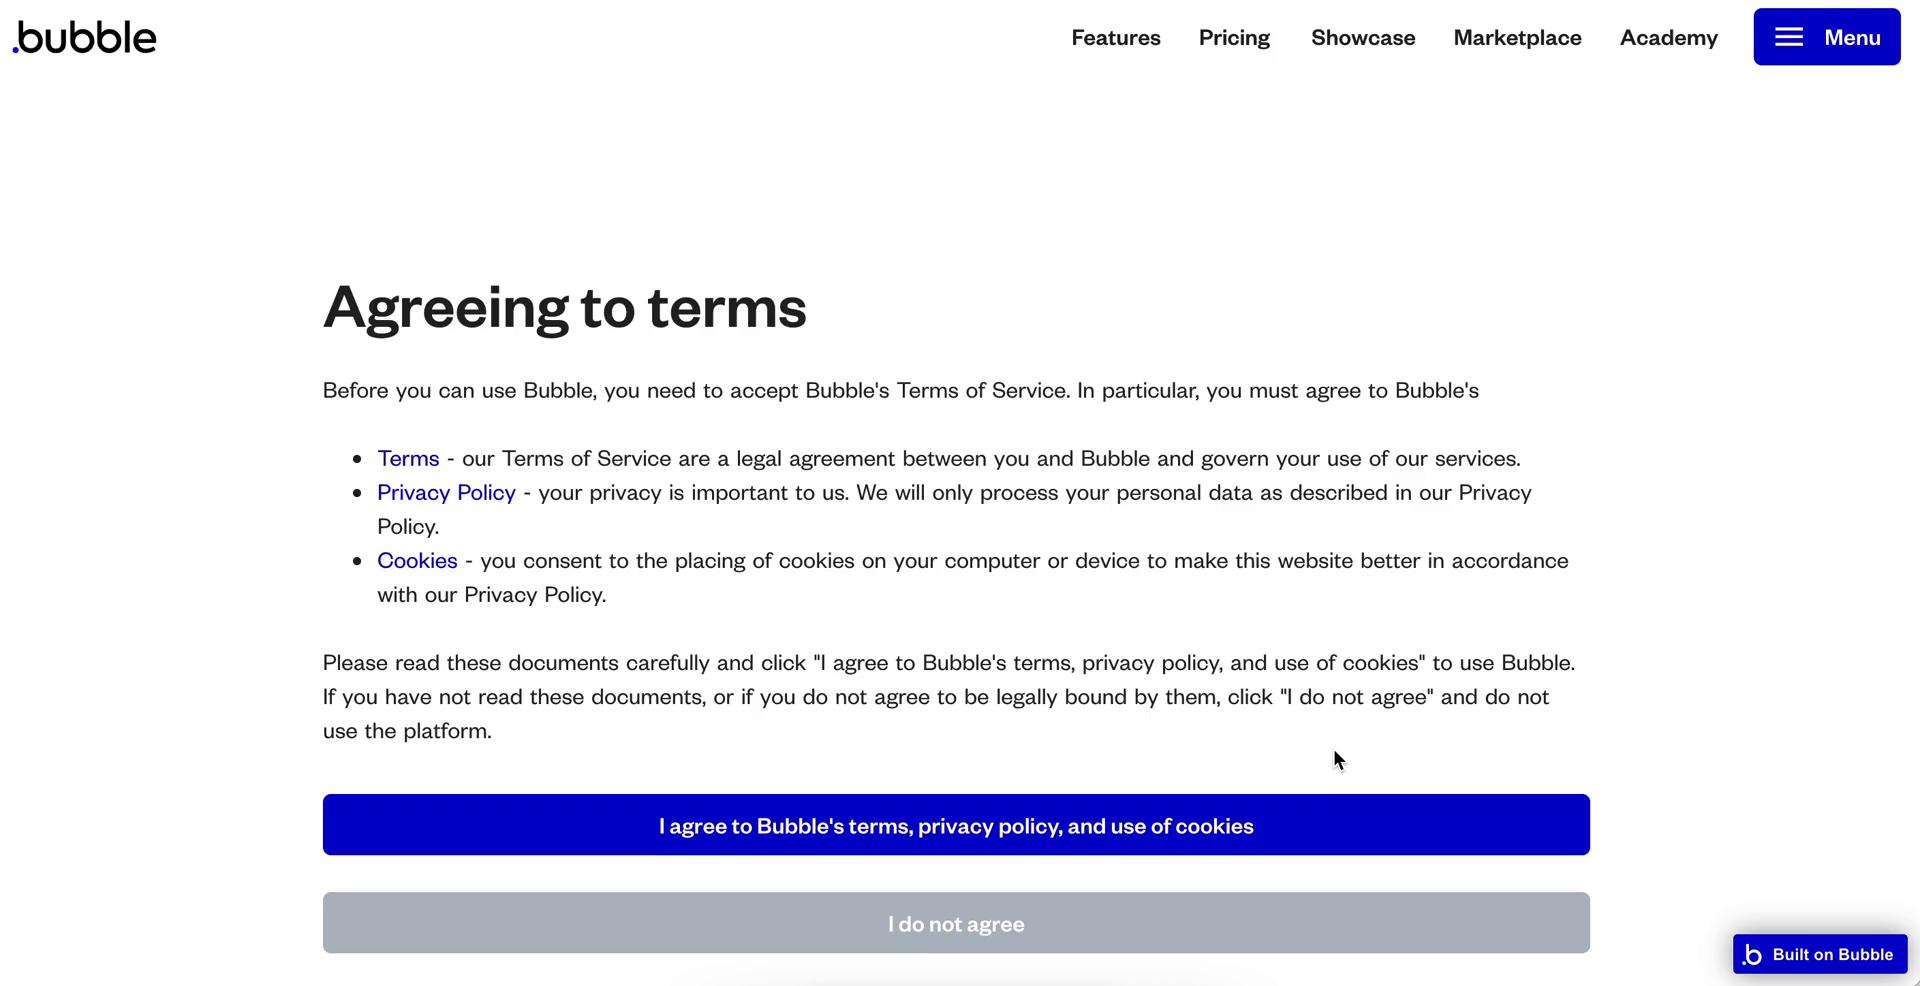 Bubble agree to terms screenshot